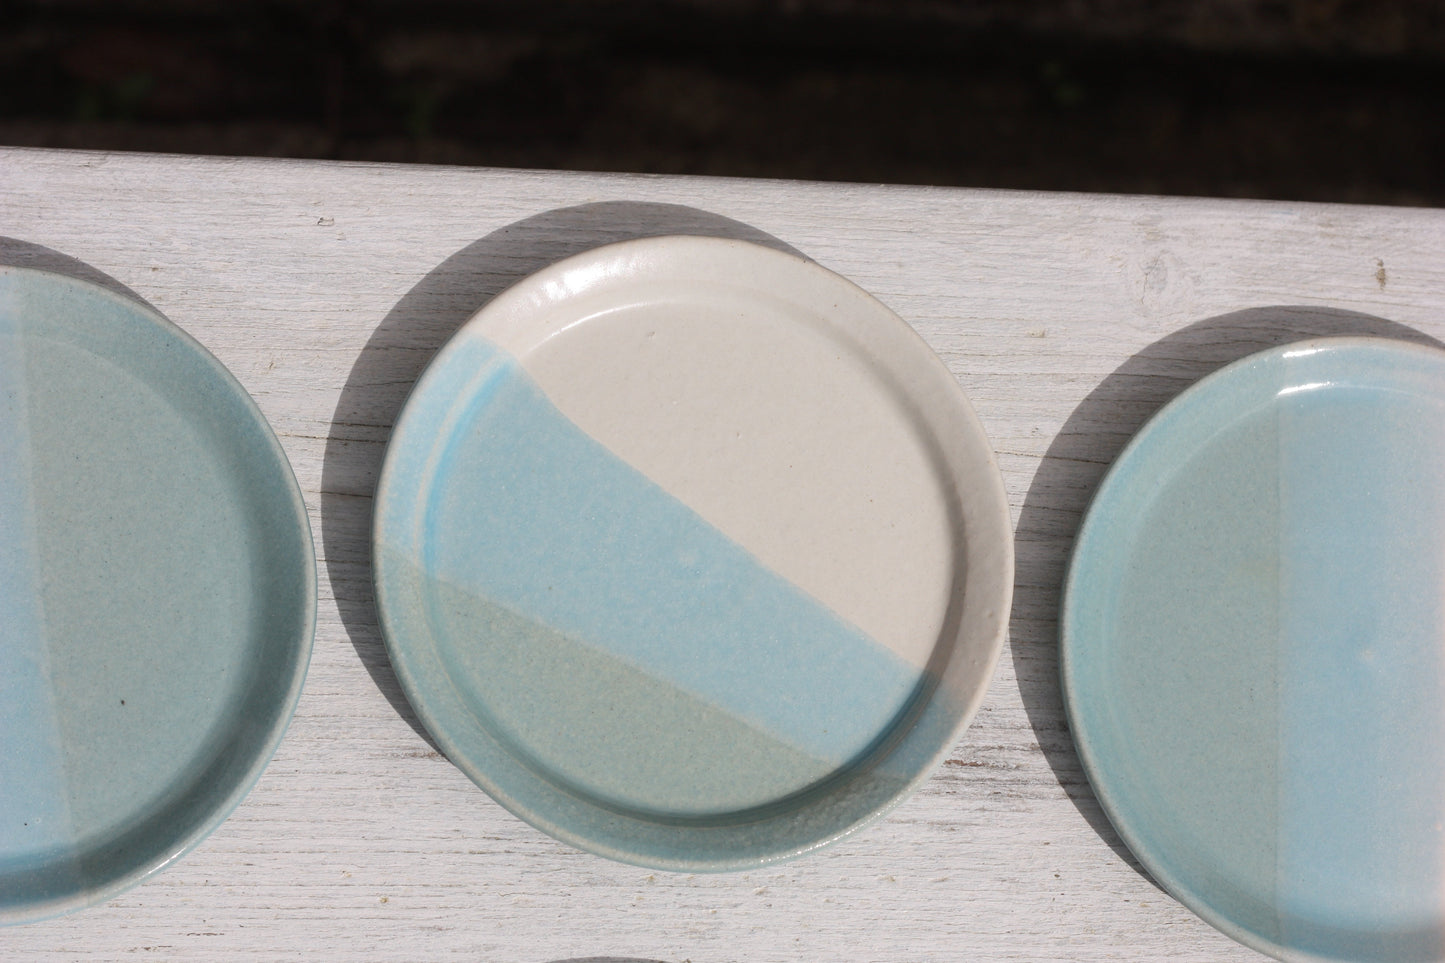 Small Plate, Candle Plate or Large Ceramic Coaster